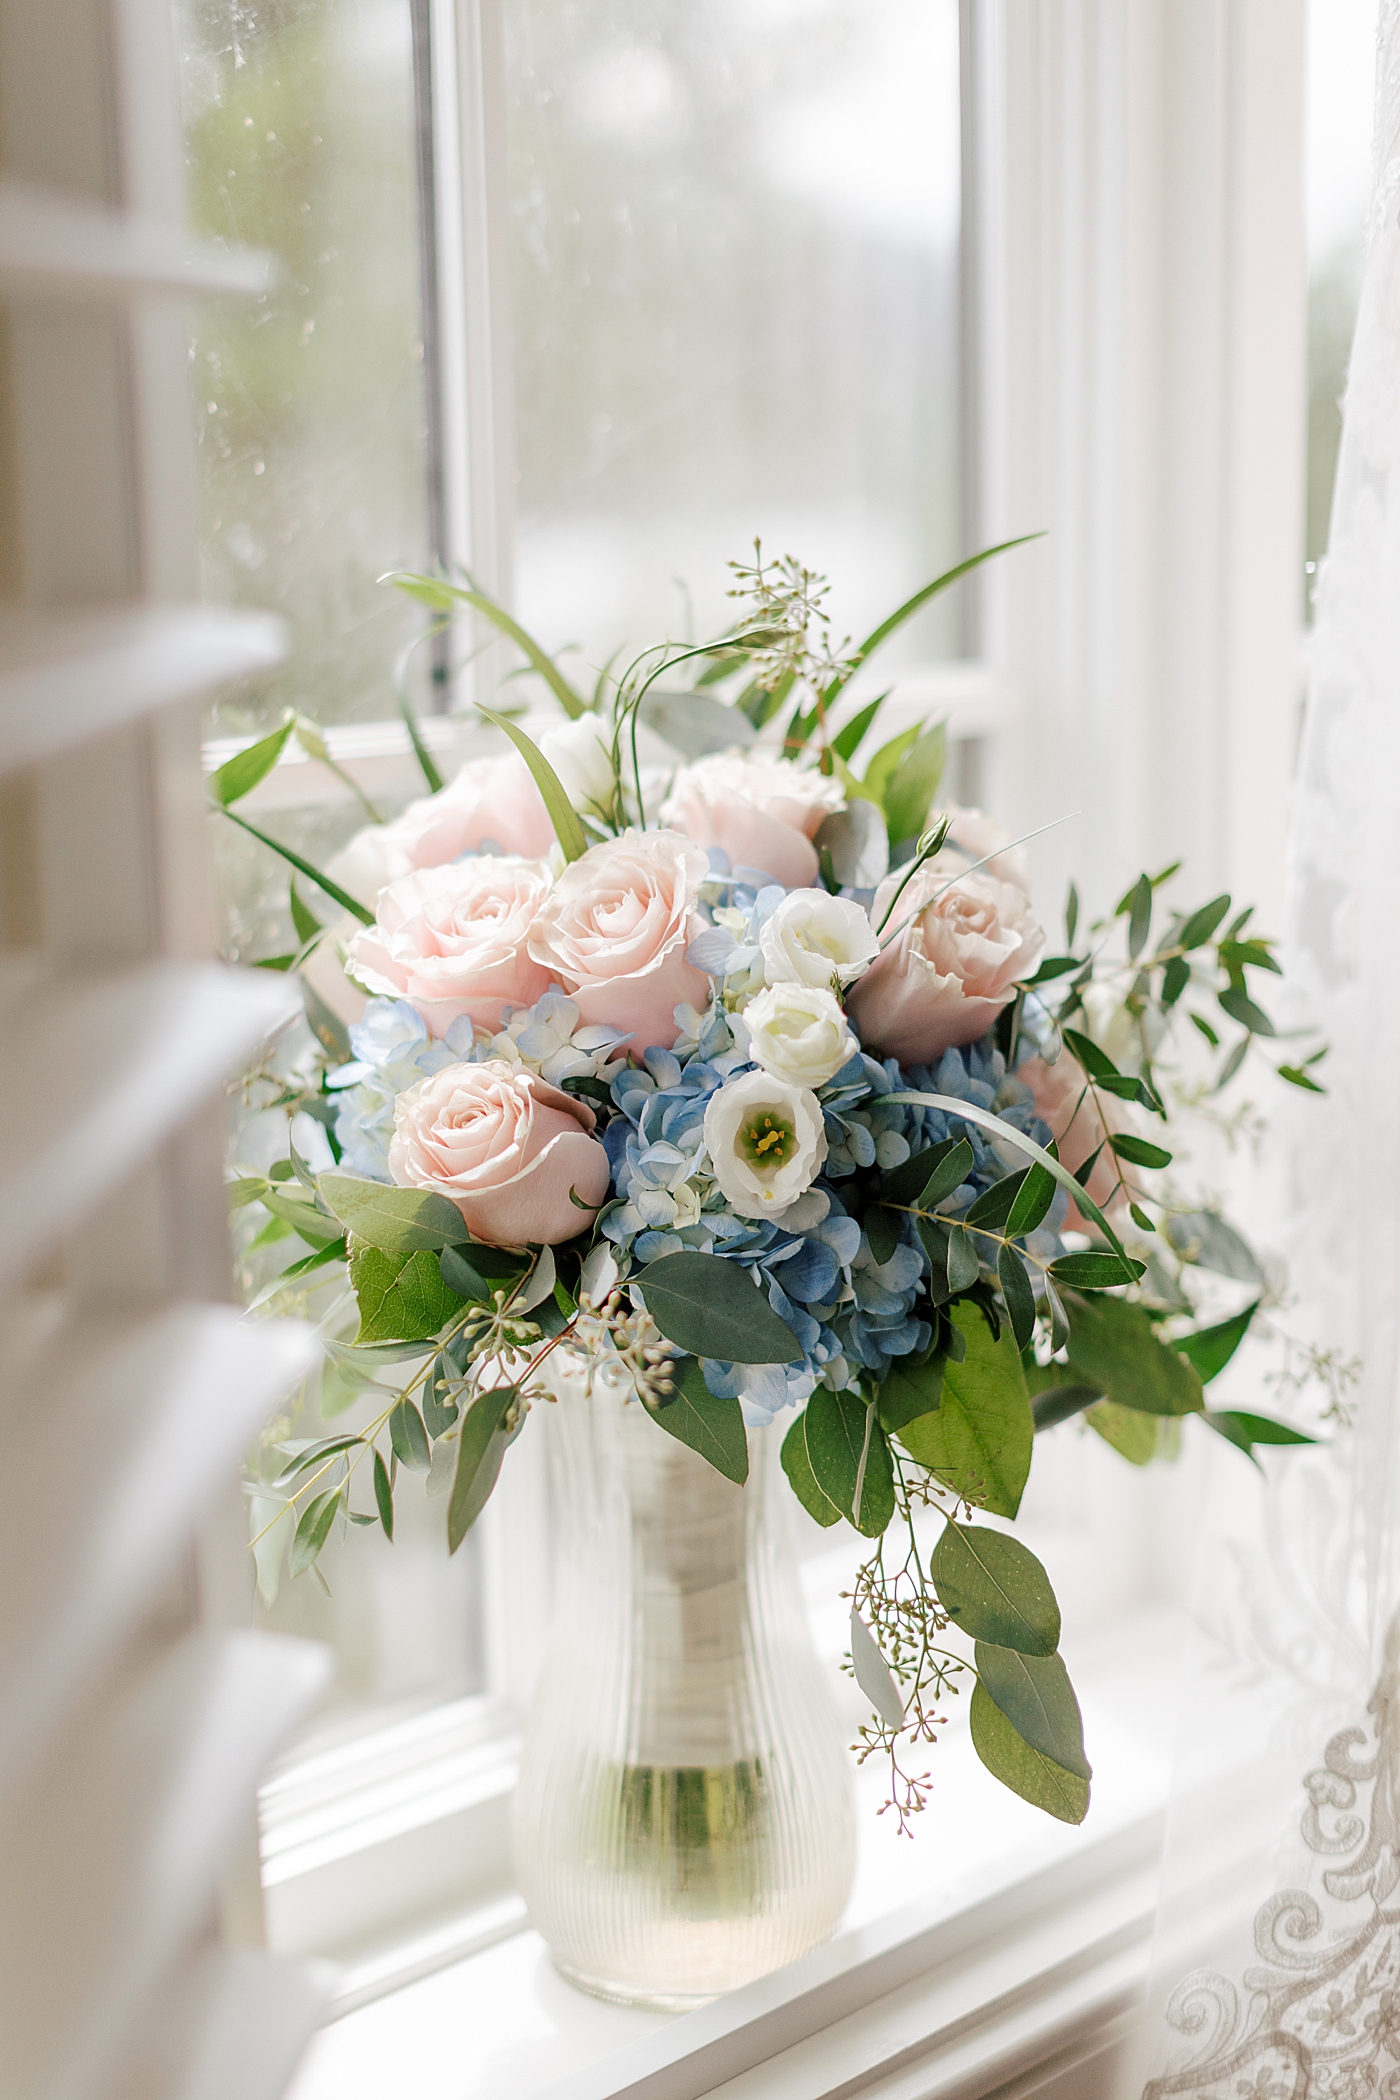 Bridal bouquet in a window | Image by Hope Helmuth Photography